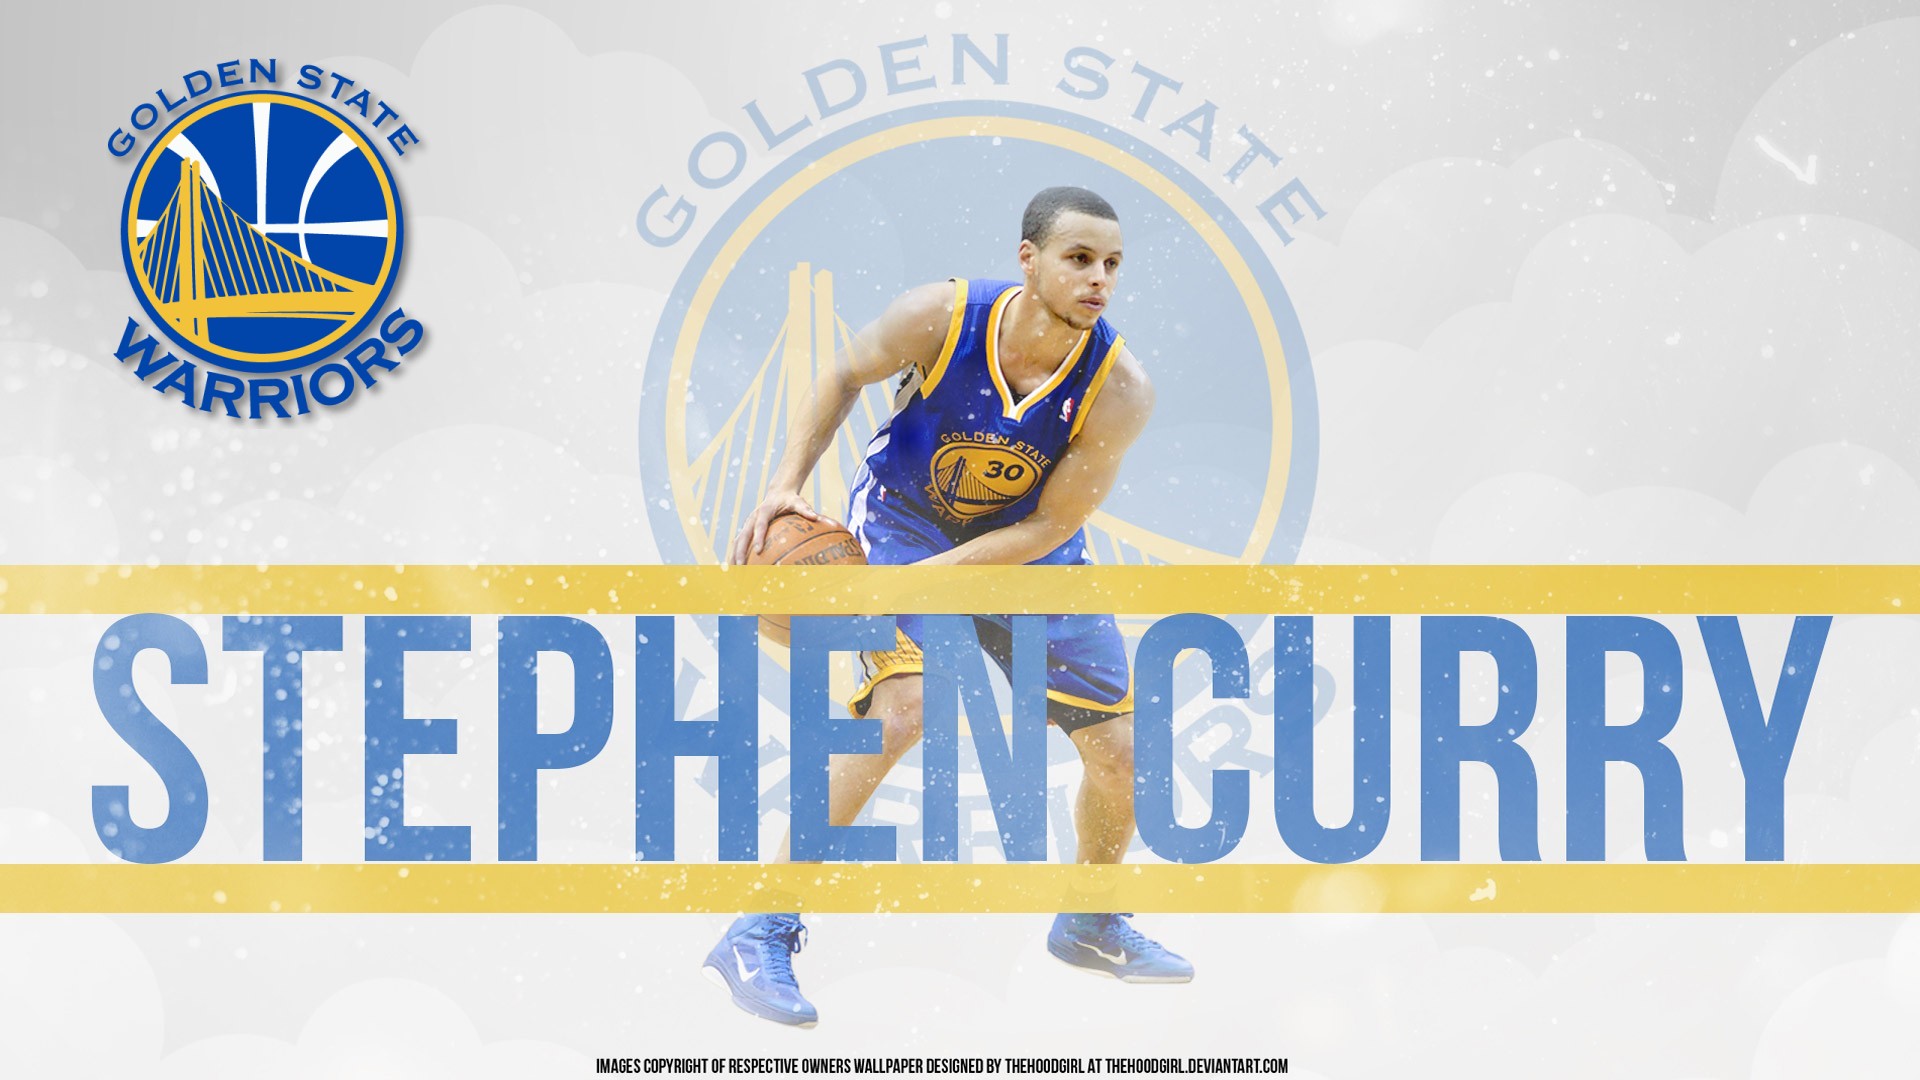 Stephen Curry Desktop Wallpaper with image dimensions 1920x1080 pixel. You can make this wallpaper for your Desktop Computer Backgrounds, Windows or Mac Screensavers, iPhone Lock screen, Tablet or Android and another Mobile Phone device